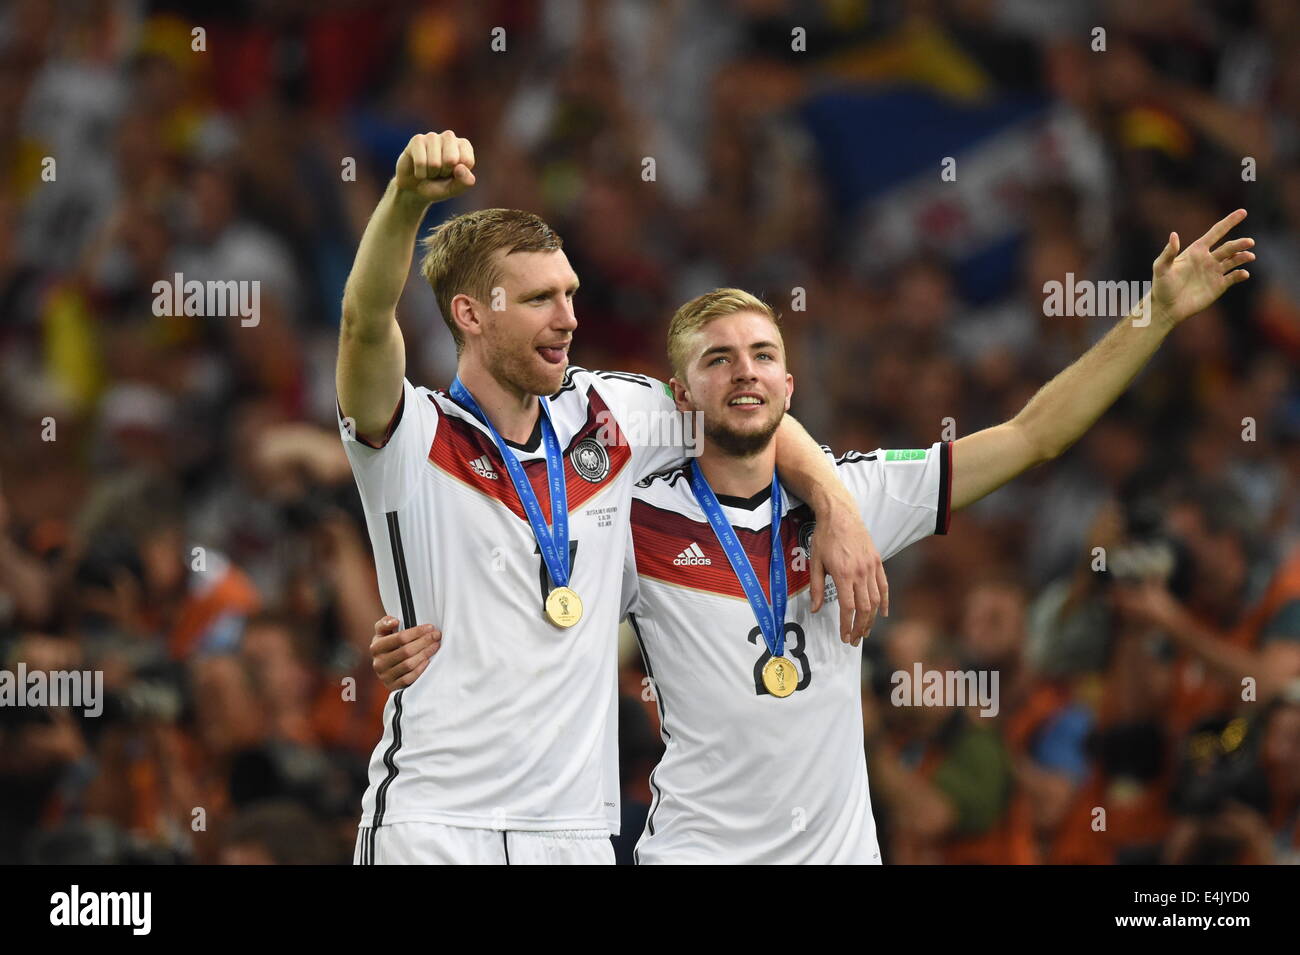 Rio de Janeiro, Brazil. 13th July, 2014. Germany's Per Mertesacker (L) and Christoph Kramer (R) celebrate on the pitch with their gold medals after winning the FIFA World Cup 2014 final soccer match between Germany and Argentina at the Estadio do Maracana in Rio de Janeiro, Brazil, 13 July 2014. Photo: Marcus Brandt/dpa/Alamy Live News Stock Photo